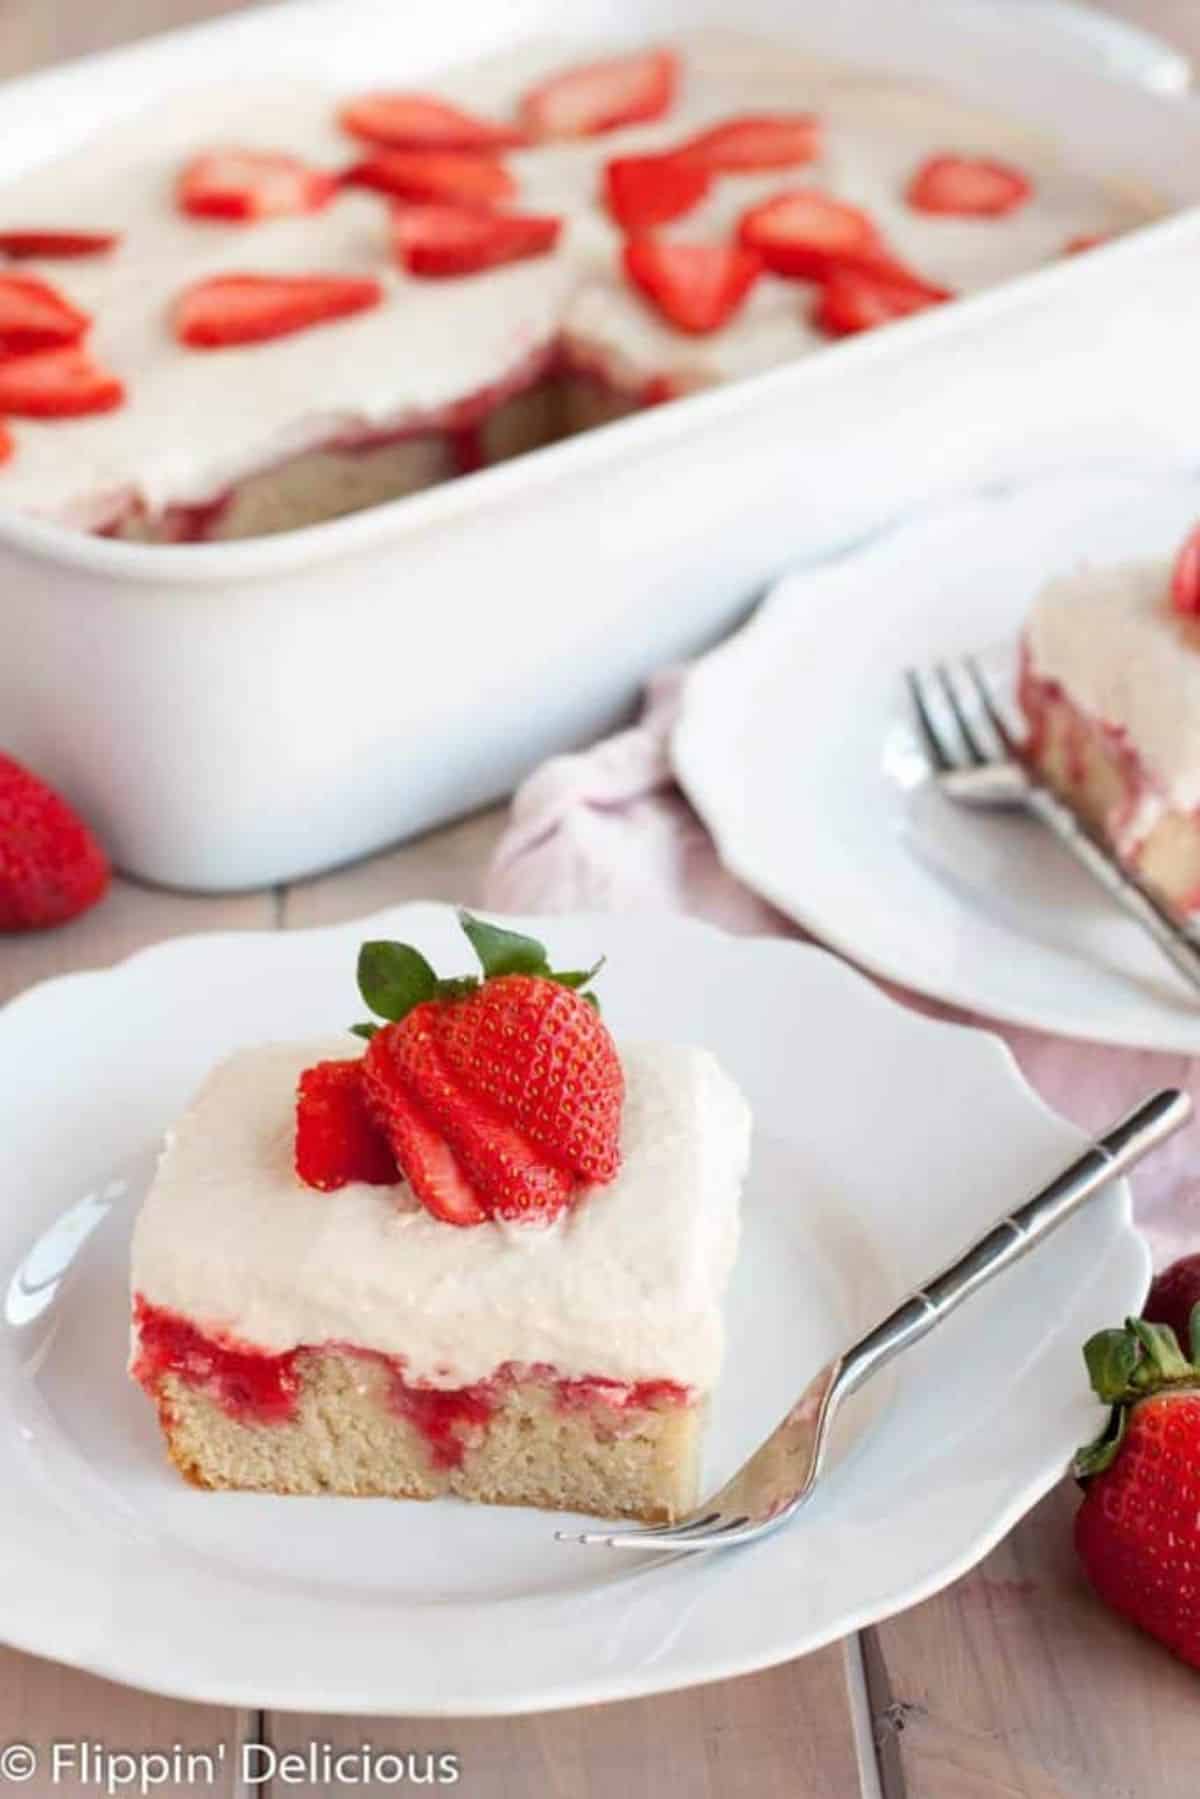 A piece of Dairy-Free Gluten-Free Strawberries and Cream Poke Cake on a white plate.